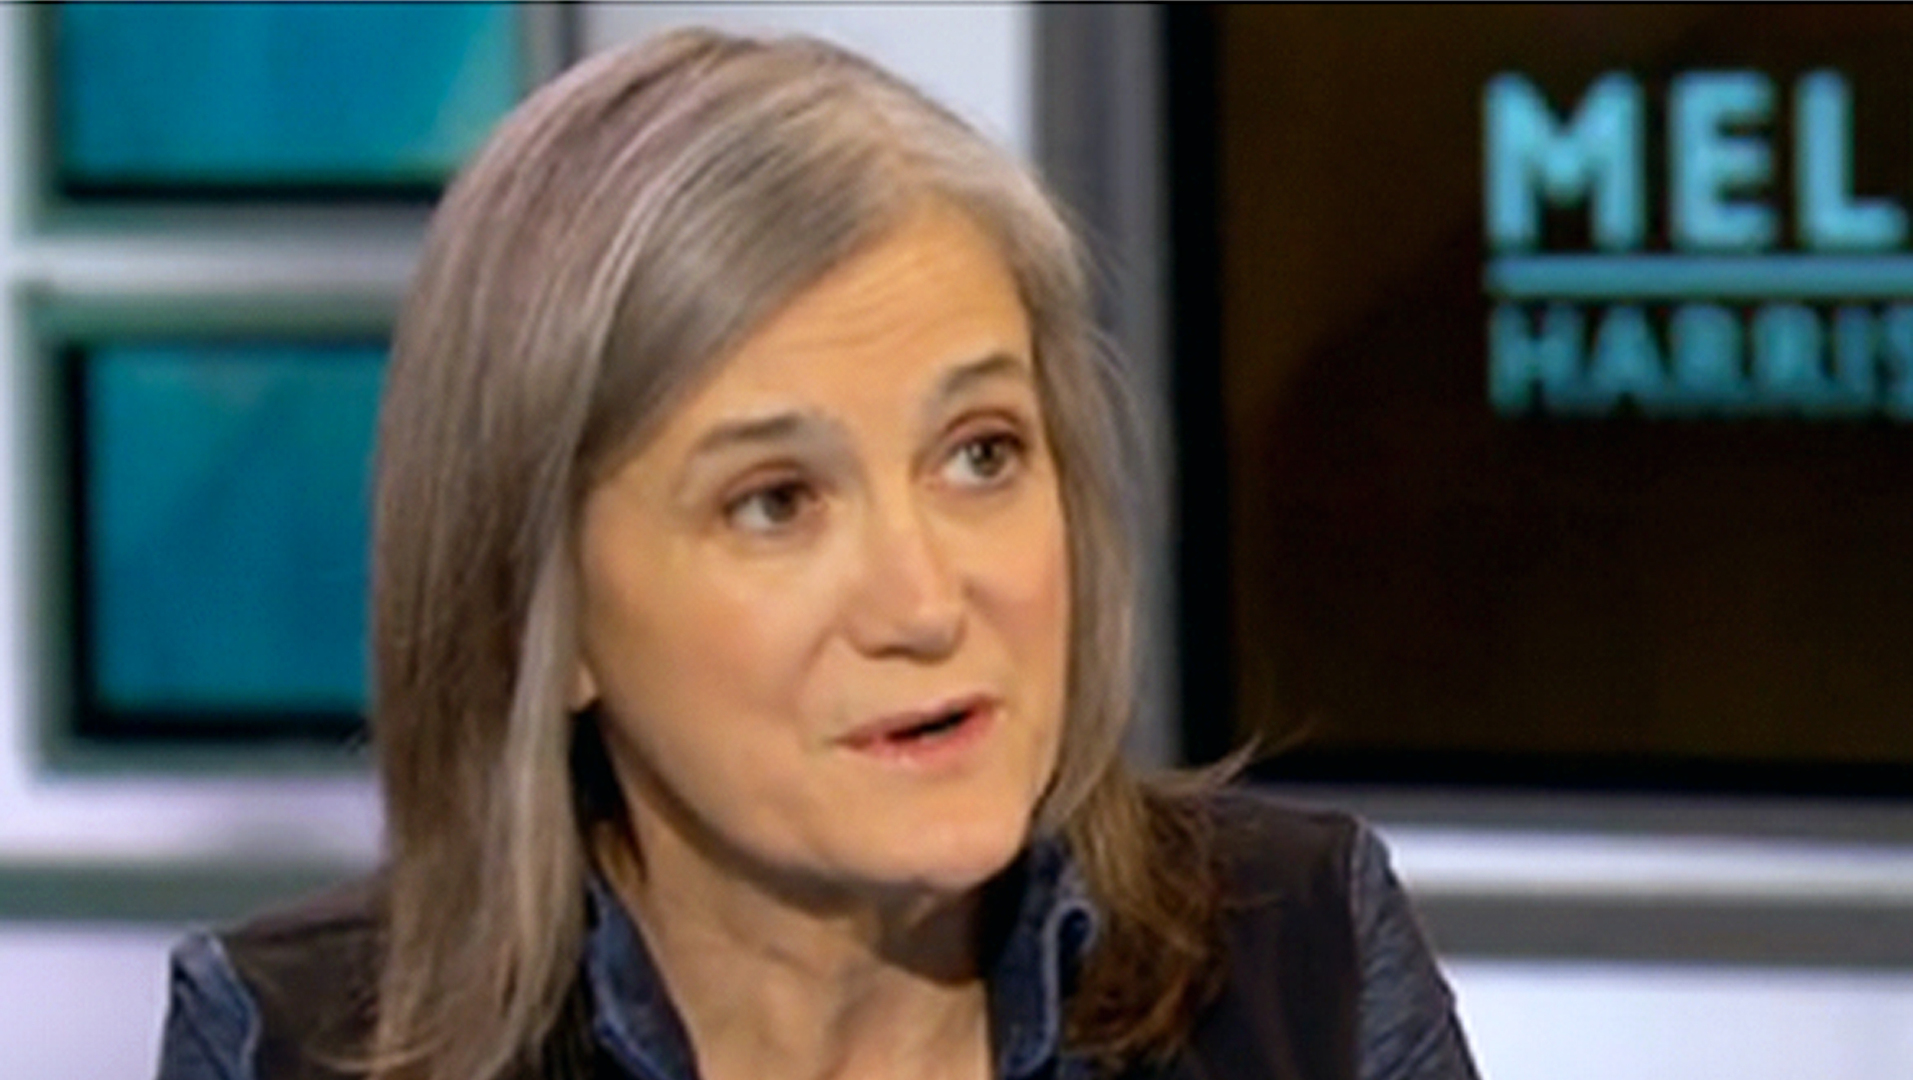 WATCH: Amy Goodman Discusses Donald Trump on MSNBC’s NOW with Alex Wagner ...